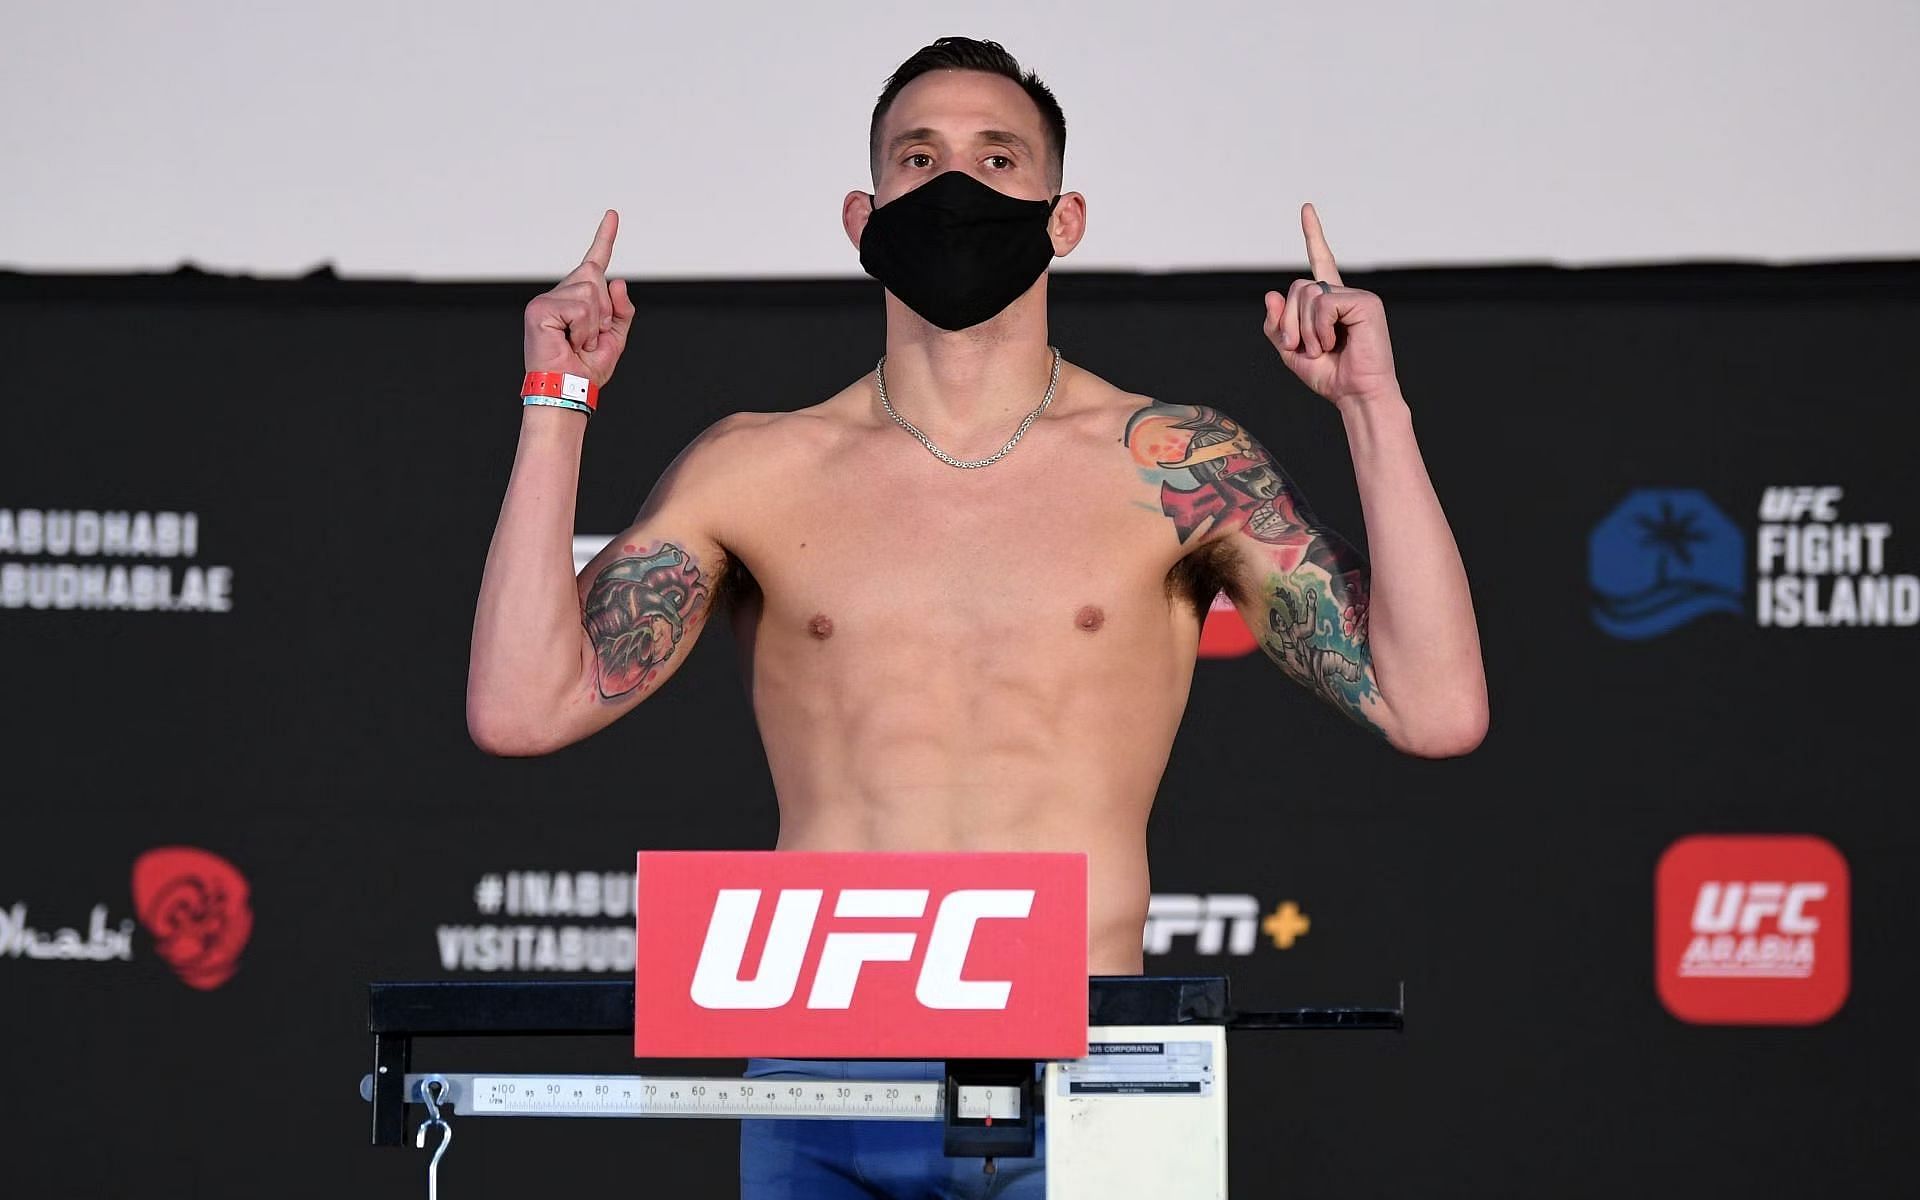 James Krause has been implicated in a betting scandal in the UFC [Image Credit: Getty]